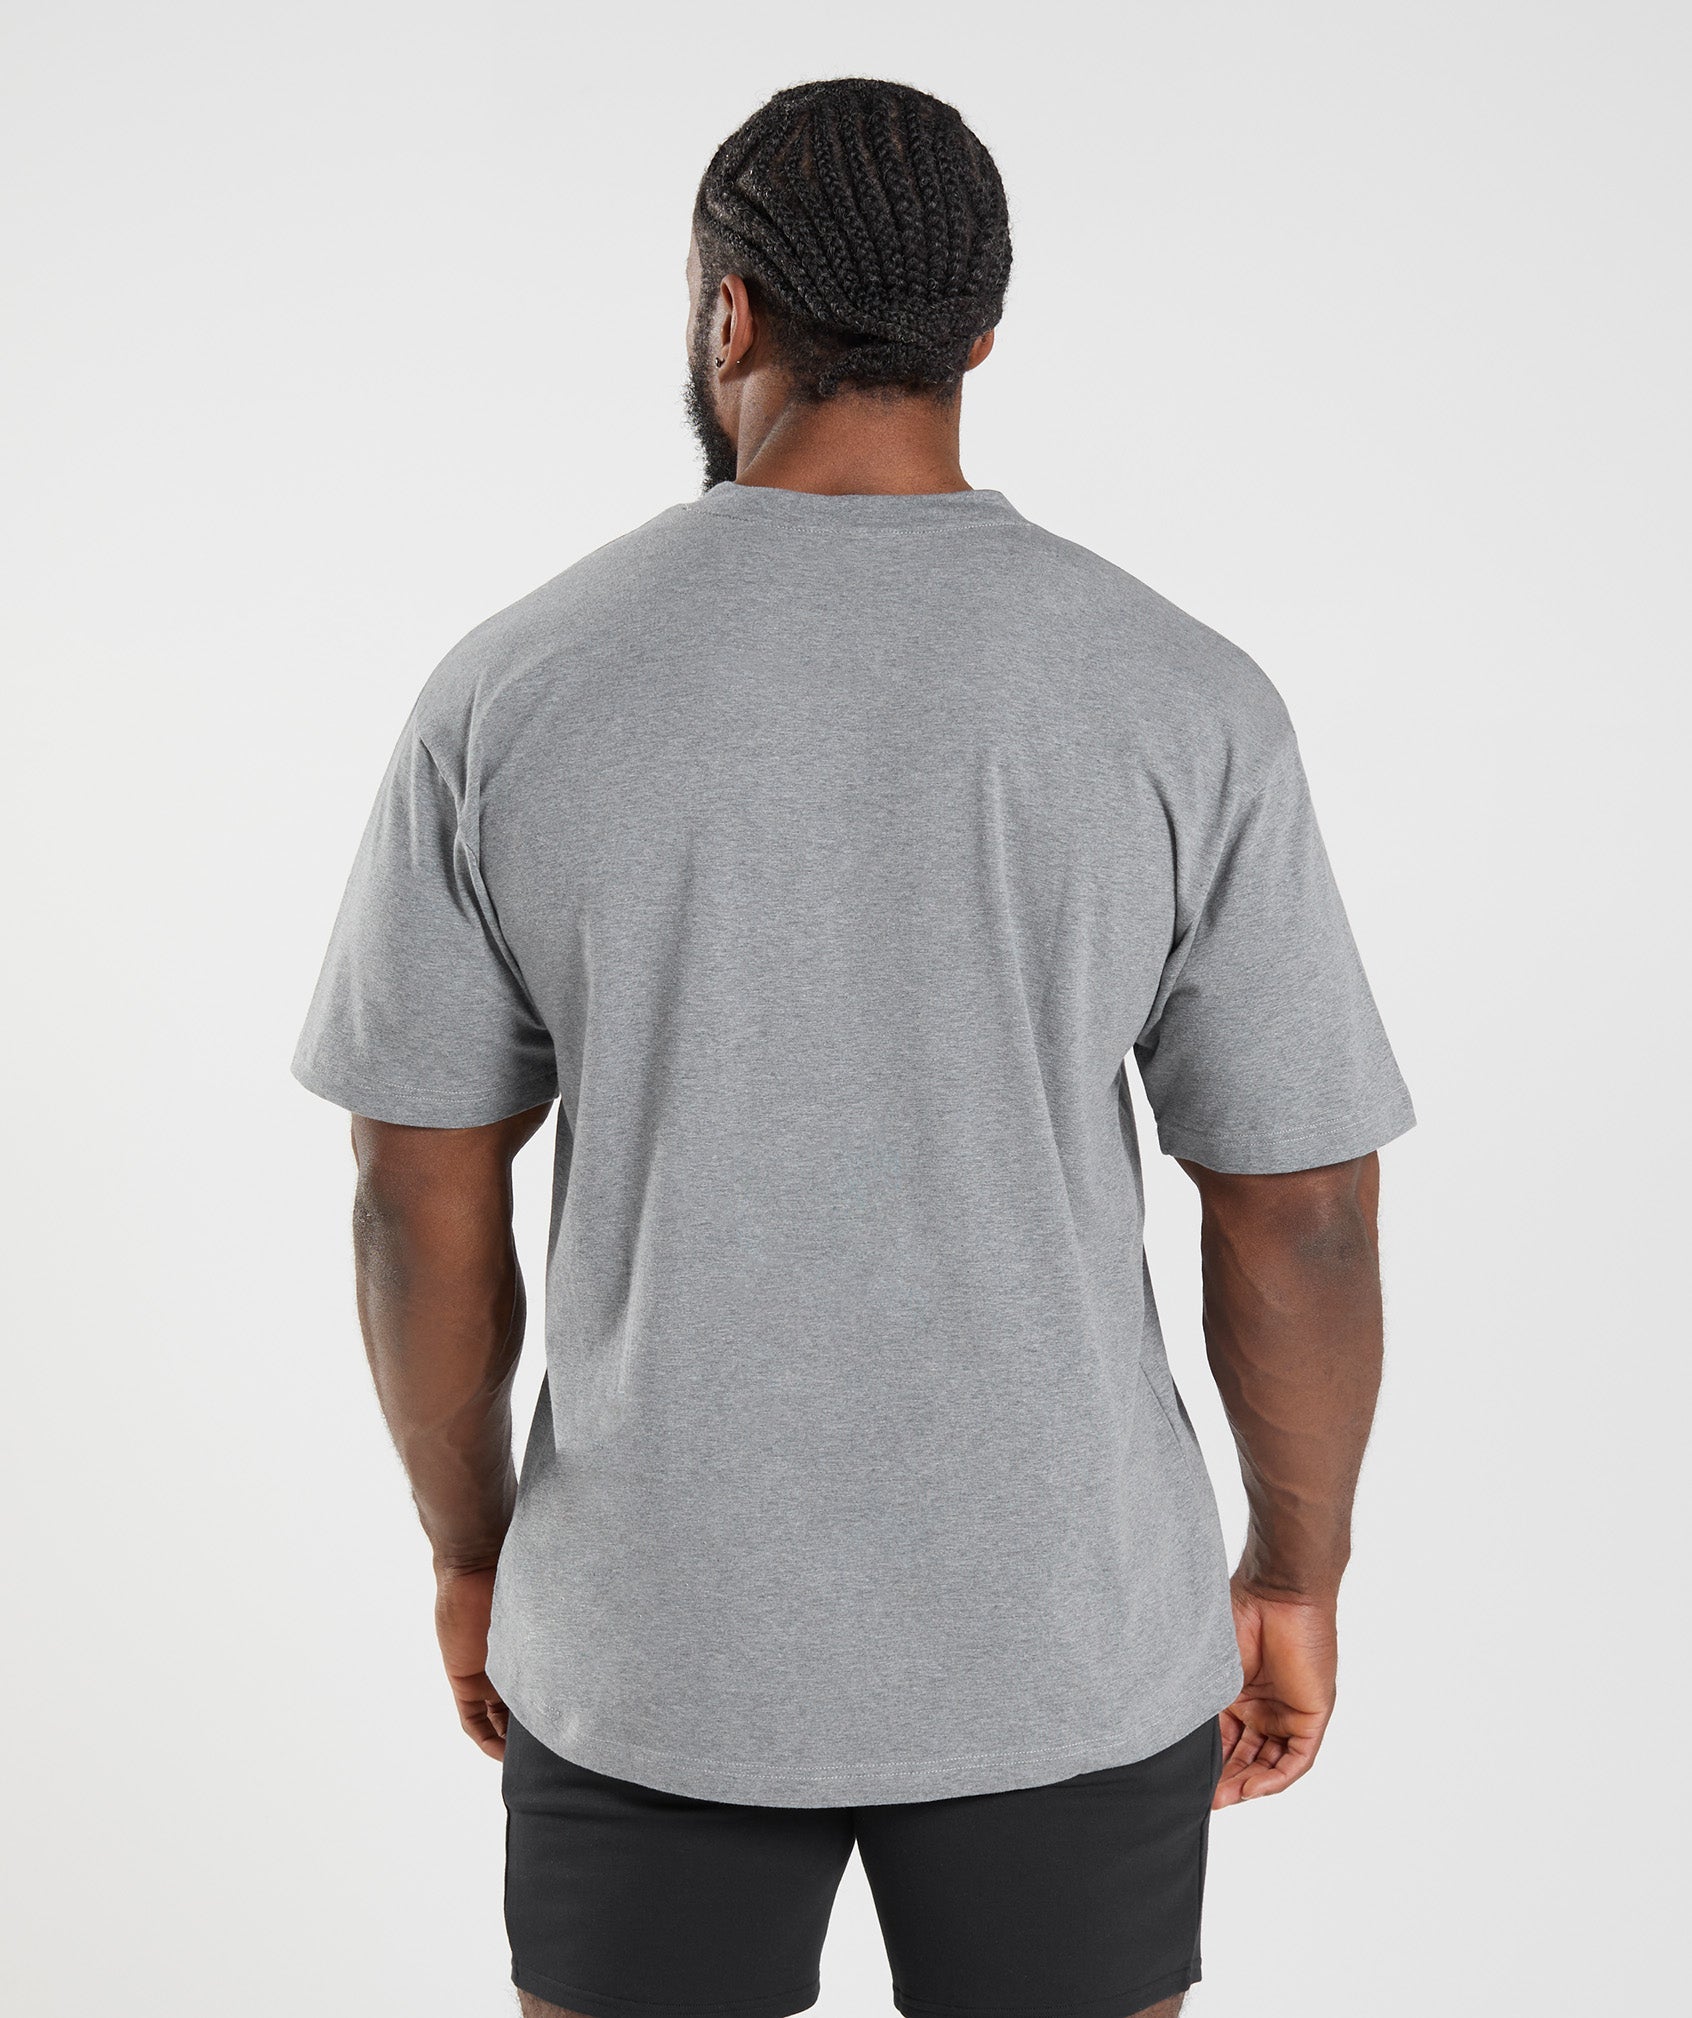 Gymshark Essential Oversized T-Shirt - Charcoal Marl